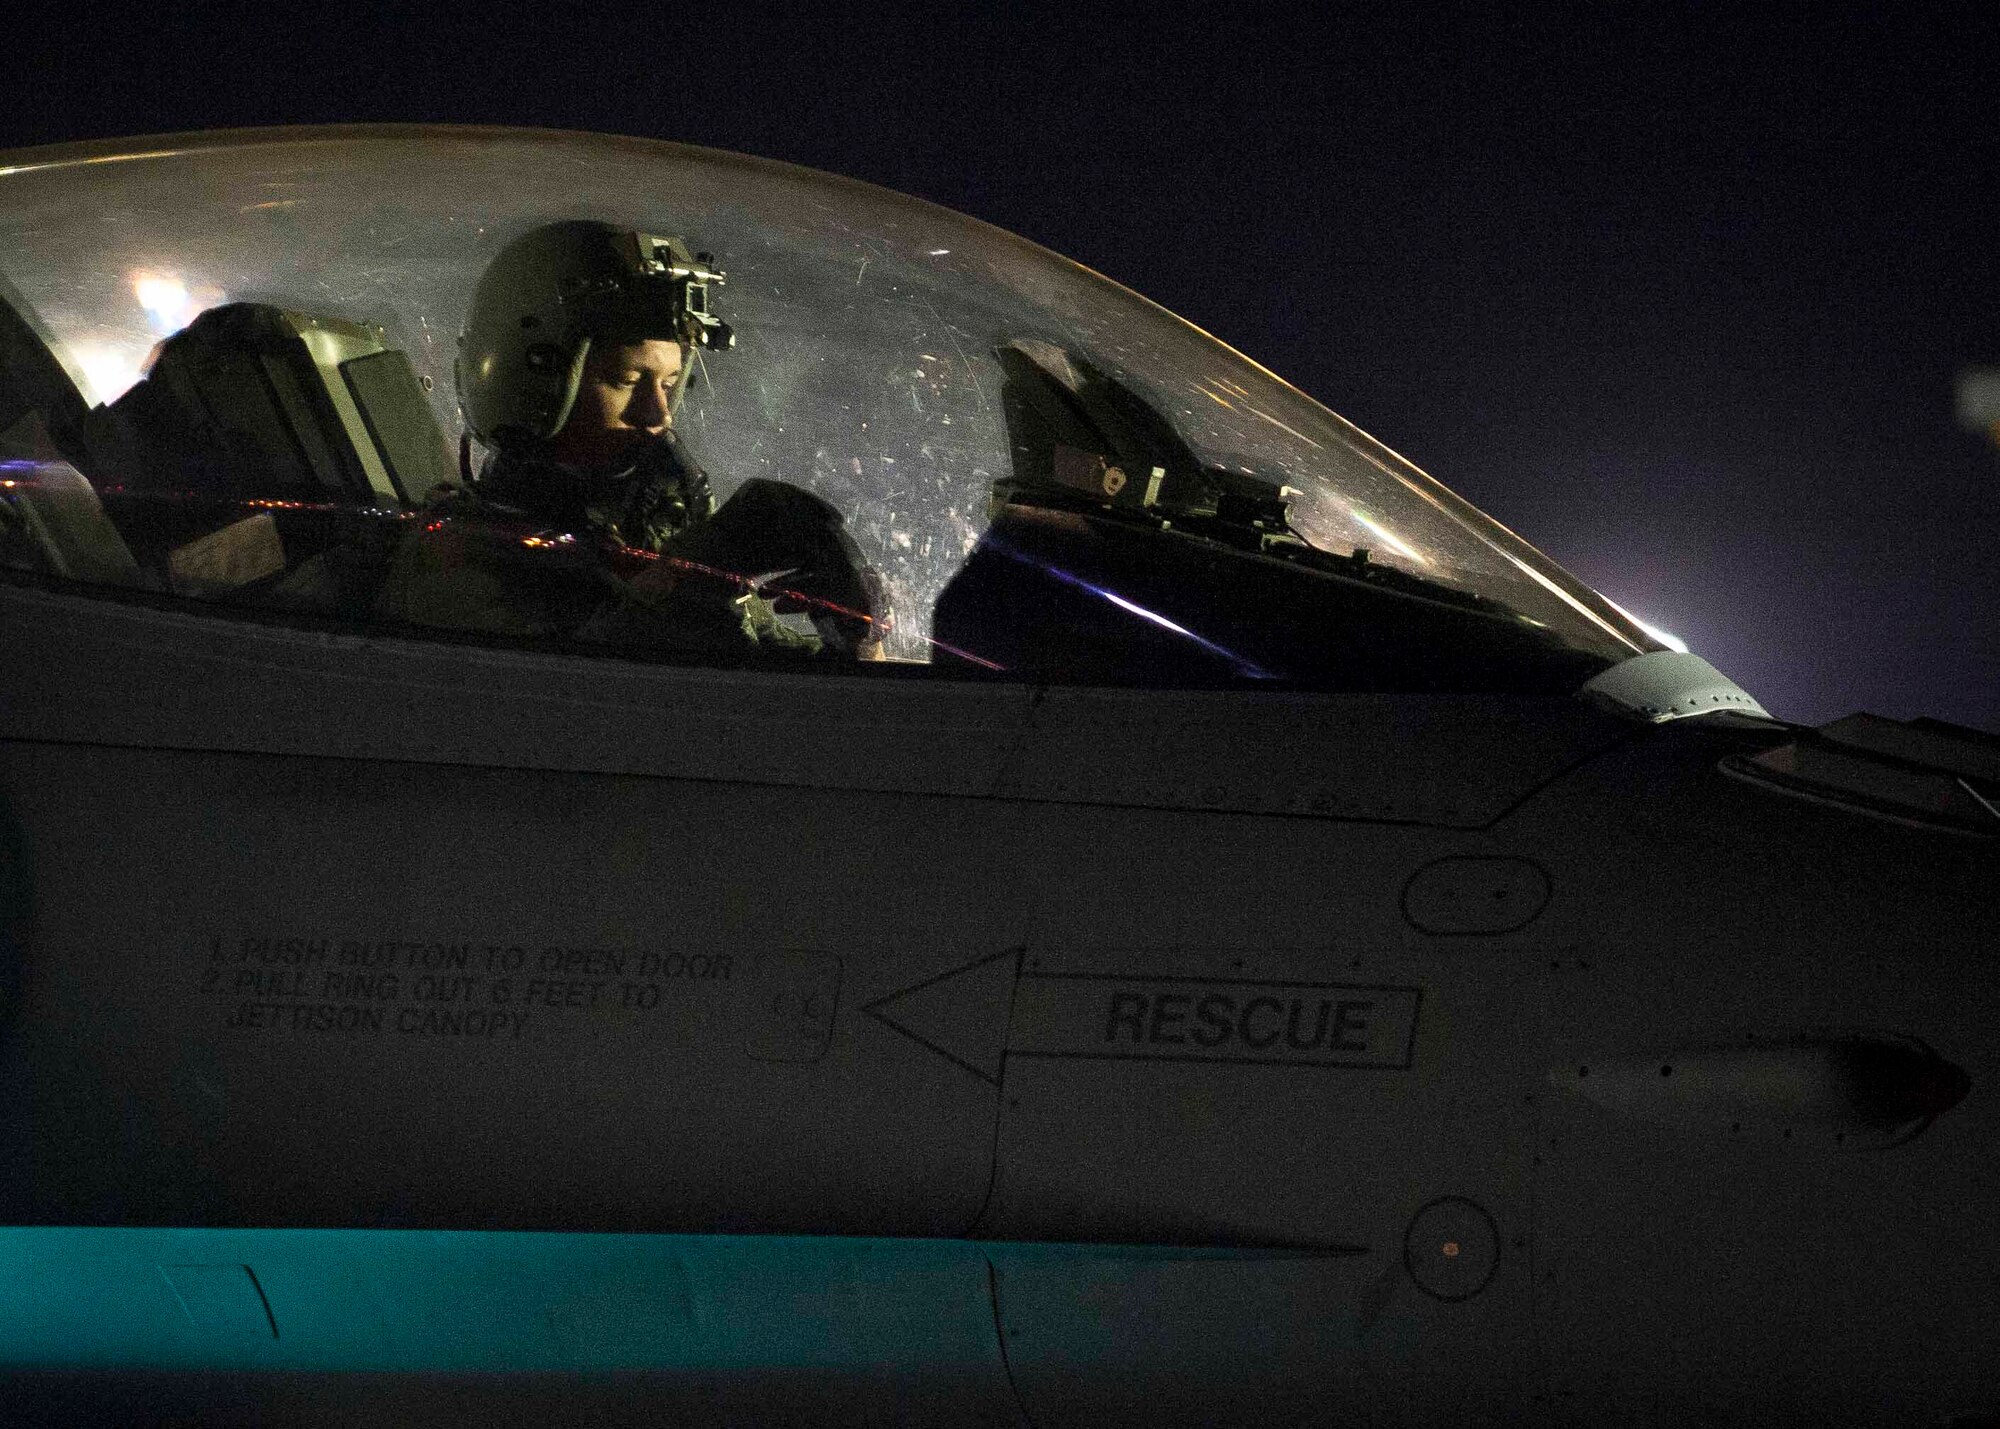 A pilot from the 20th Fighter Wing, Shaw Air Force Base, S.C., goes over pre-flight checks on his F-16 before taking off for a night sortie during Red Flag 16-3 July 13. Red Flag exercises train Airmen in Air, Space and Cyberspace to better prepare them for future operations. (U.S. Air Force photo by Senior Airman Jake Carter)